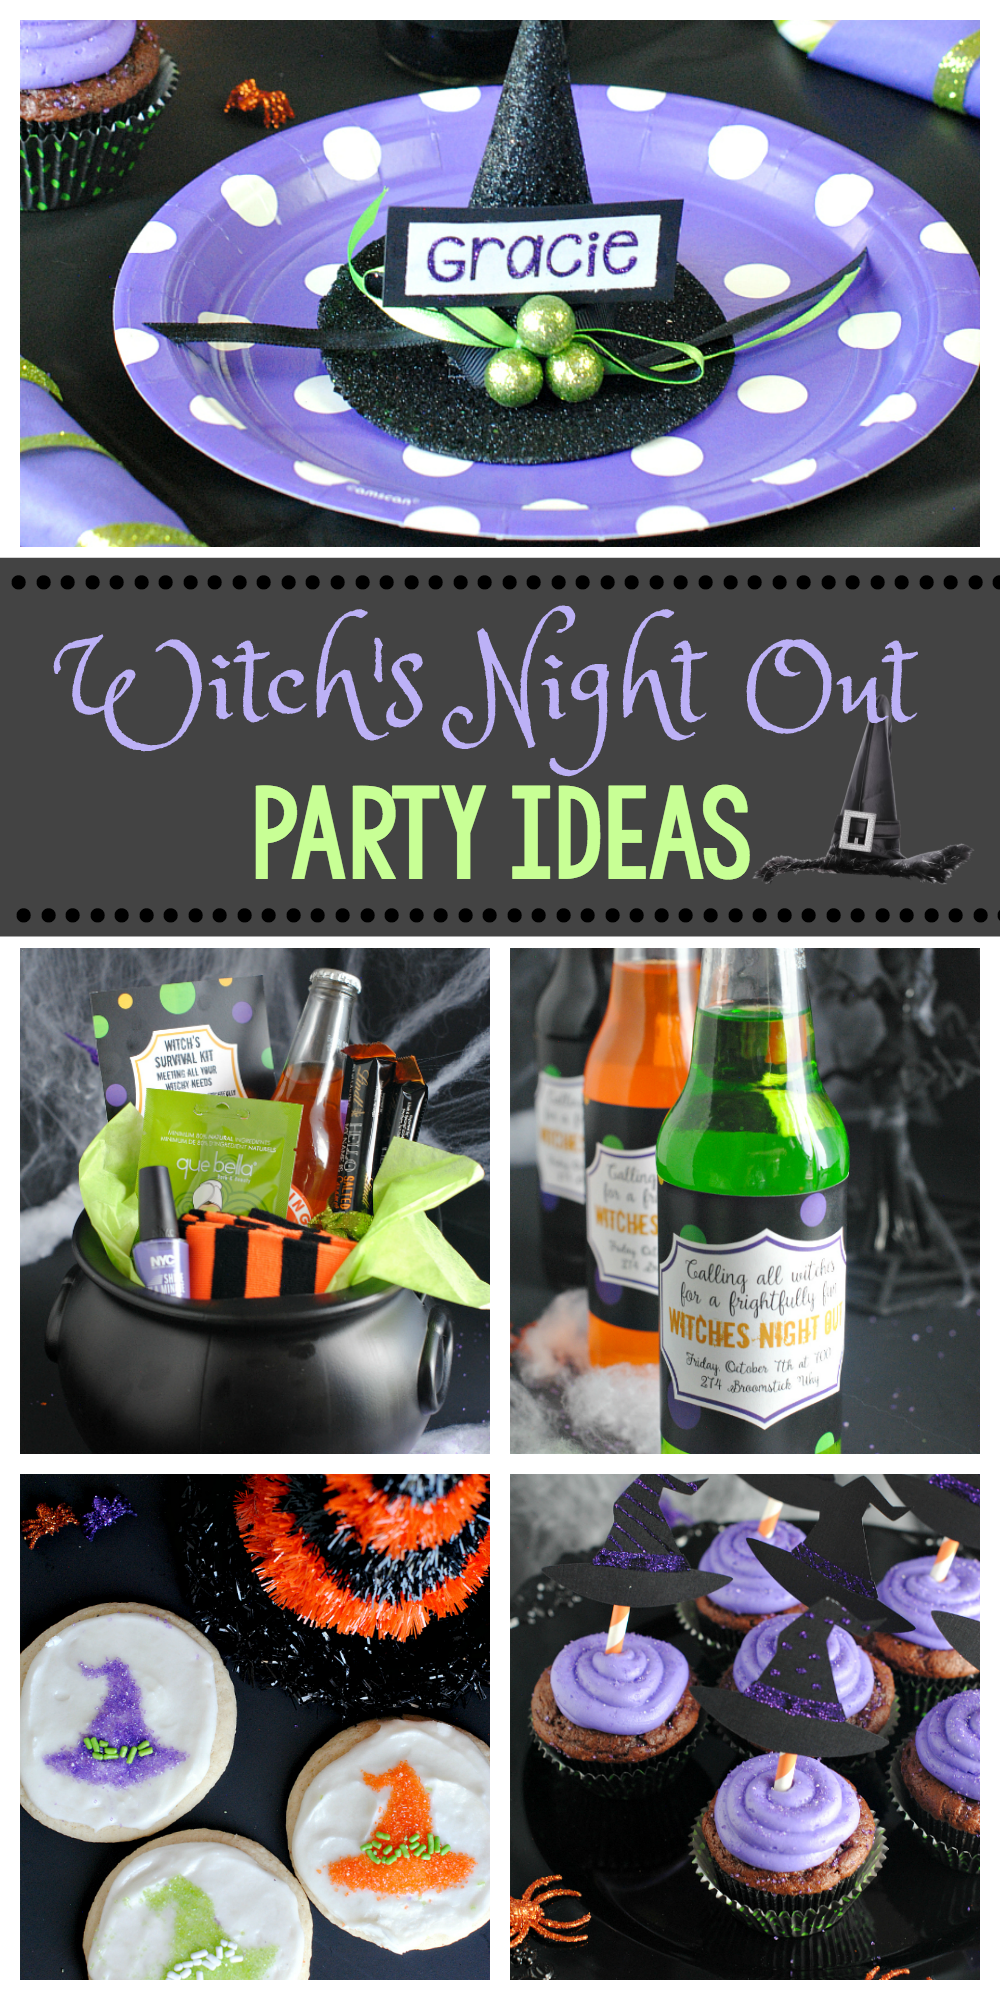 Witch's Night Out Party